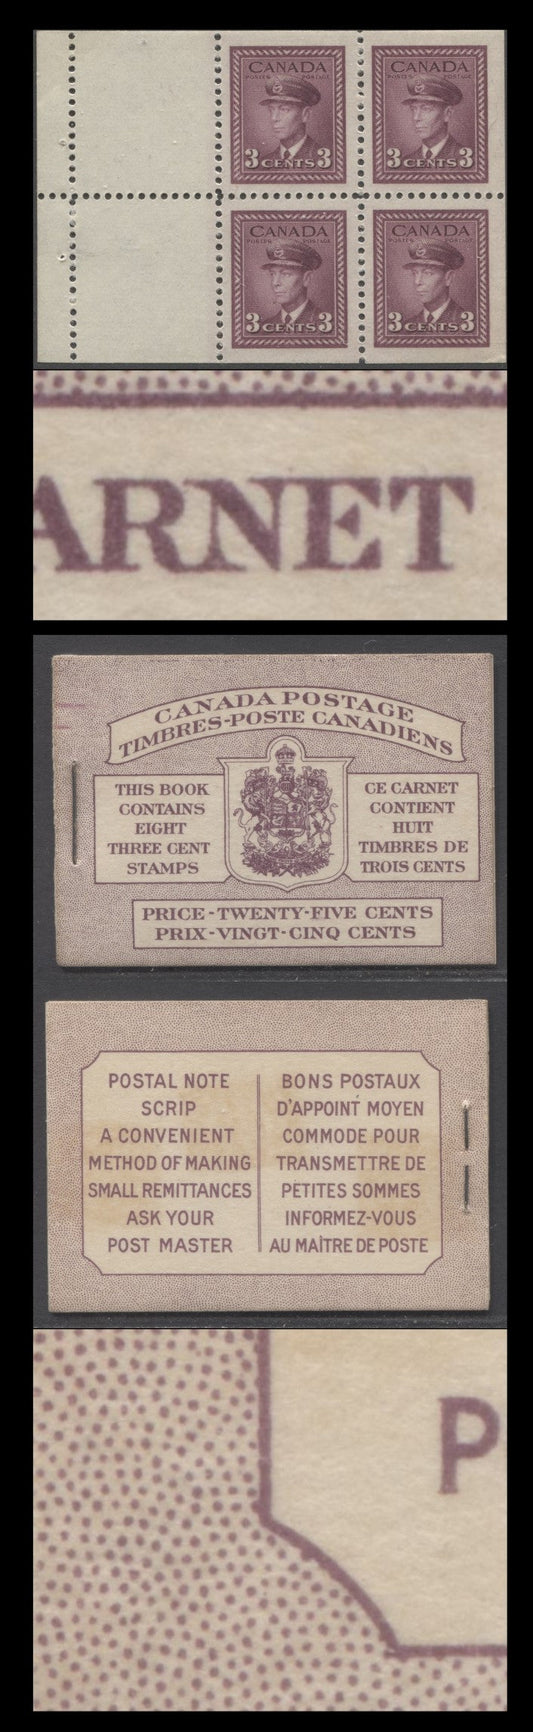 Lot 88 Canada #BK35cB 1942-1947 War Issue, A Complete 25c Bilingual Booklet, 2 Panes Of 4+2 Labels 3c Rose Violet, Front Cover IIId, Back Cover Fbii, Type IIa, 7c & 6c Rates, 'Post Master' Two Words, 407,000 Issued